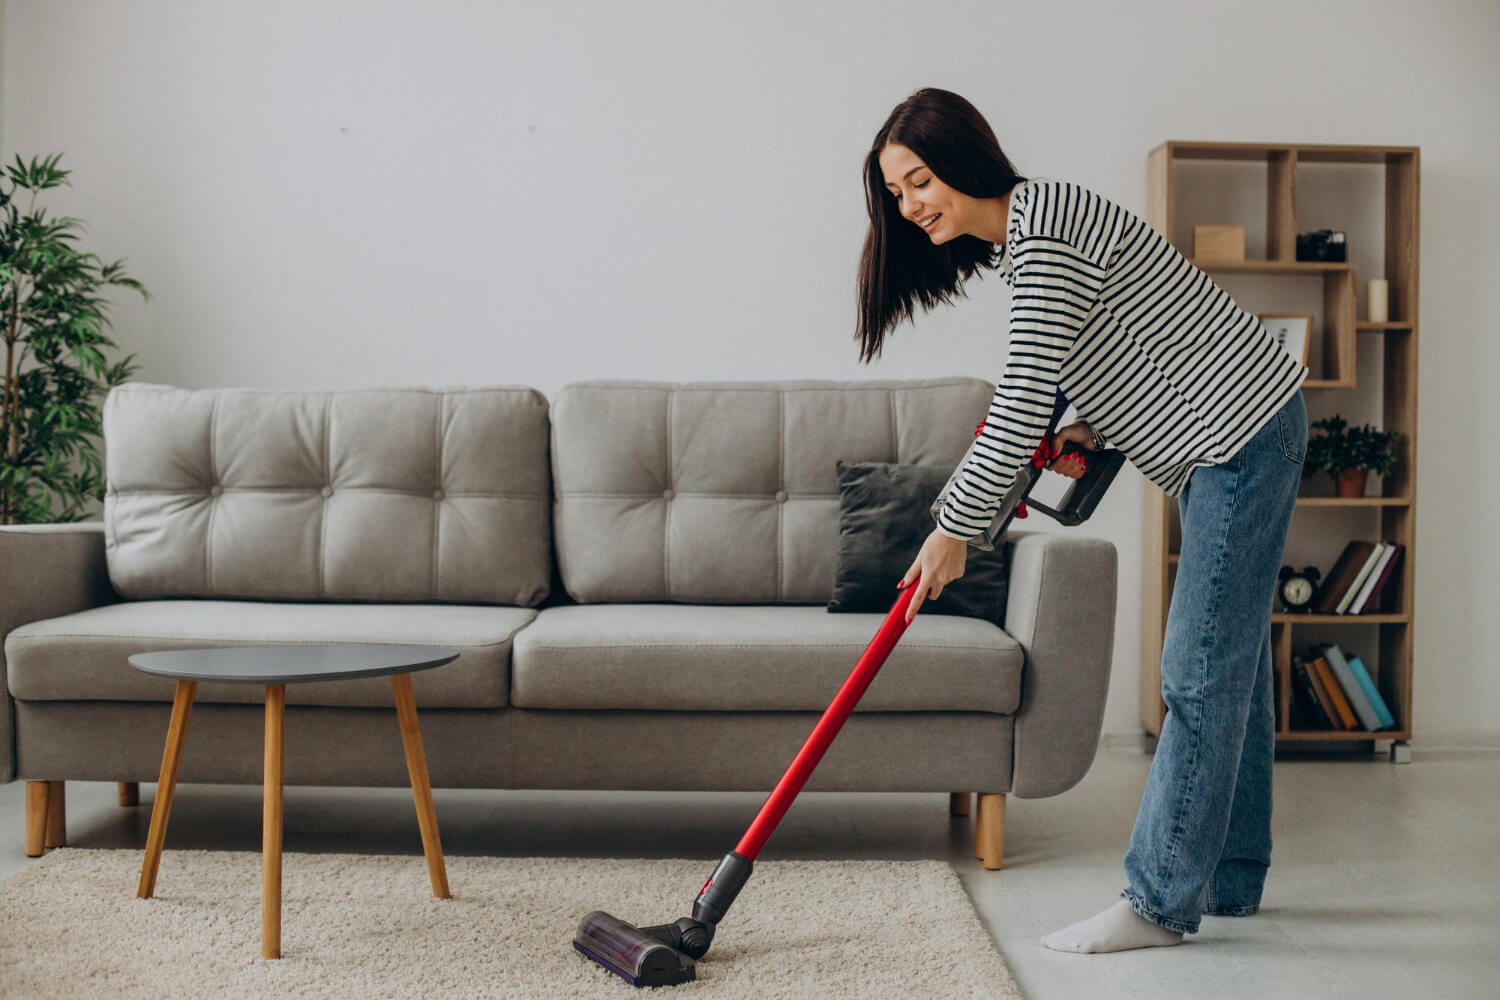 woman vacuuming her carpet in her living room while smilling